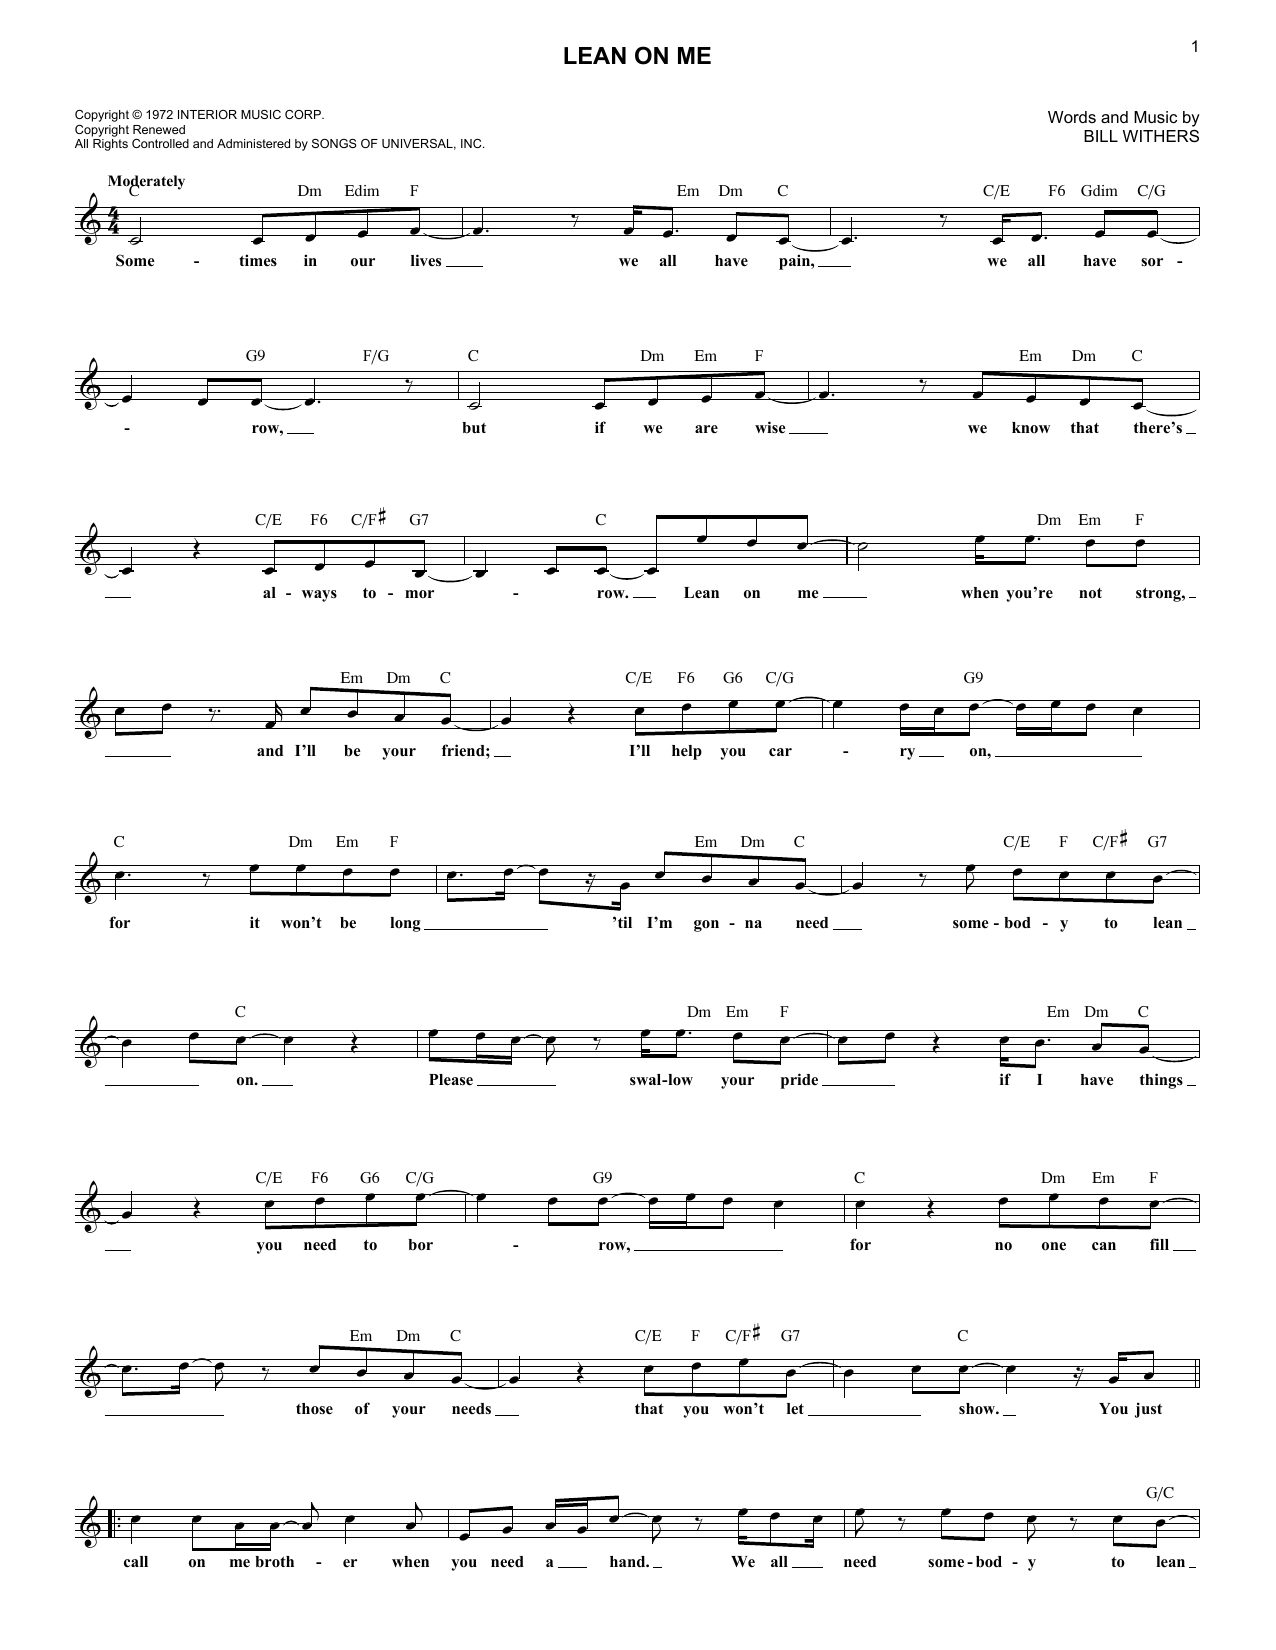 Lean On Me Chords Sheet Music Digital Files To Print Licensed Bill Withers Digital